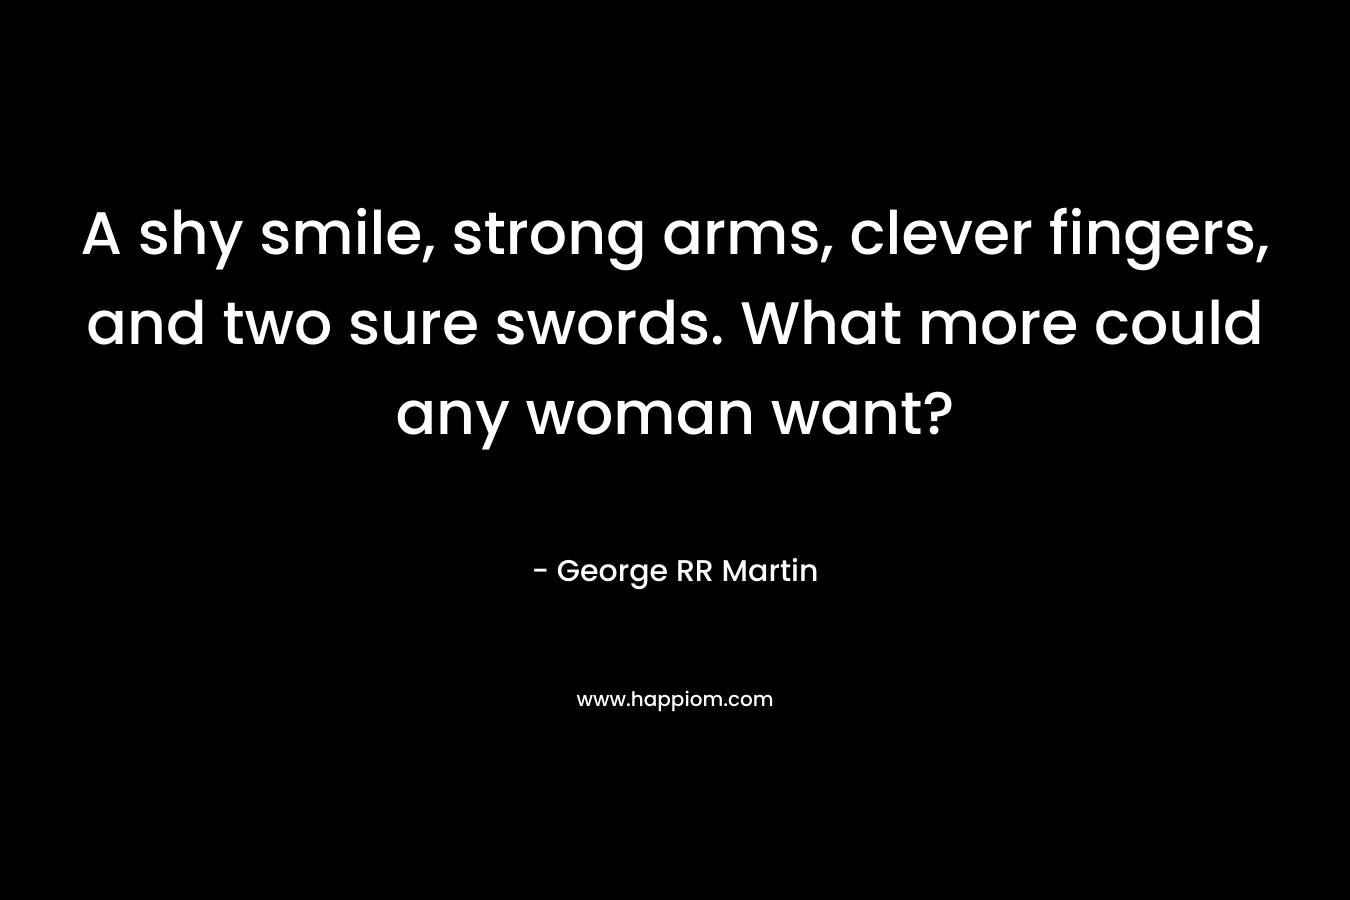 A shy smile, strong arms, clever fingers, and two sure swords. What more could any woman want?